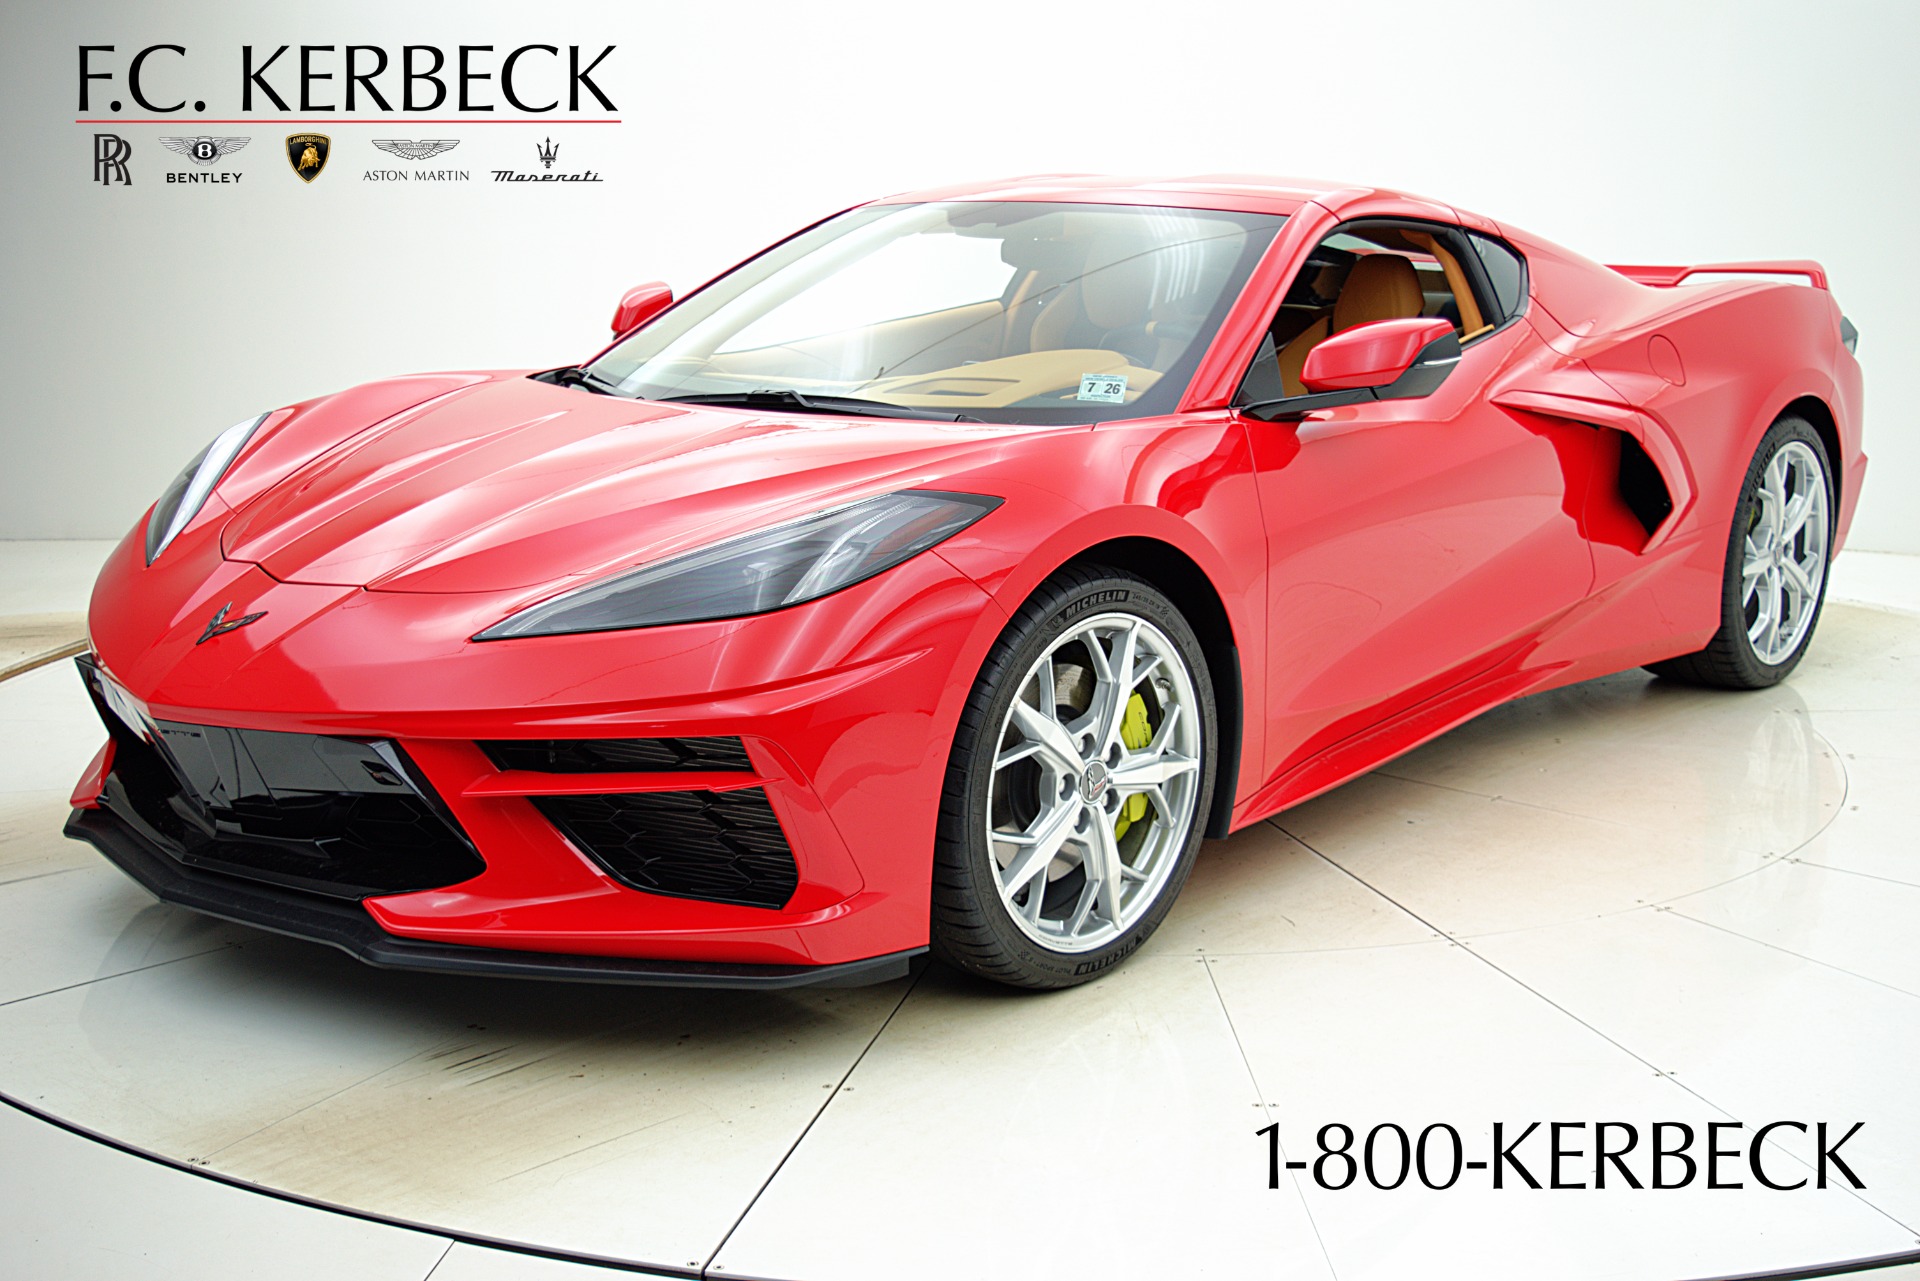 Used 2021 Chevrolet Corvette 3LT WAS PRICE $99,000 NOW PRICE $94,000 UNTIL MAY 31ST for sale $94,000 at F.C. Kerbeck Aston Martin in Palmyra NJ 08065 2